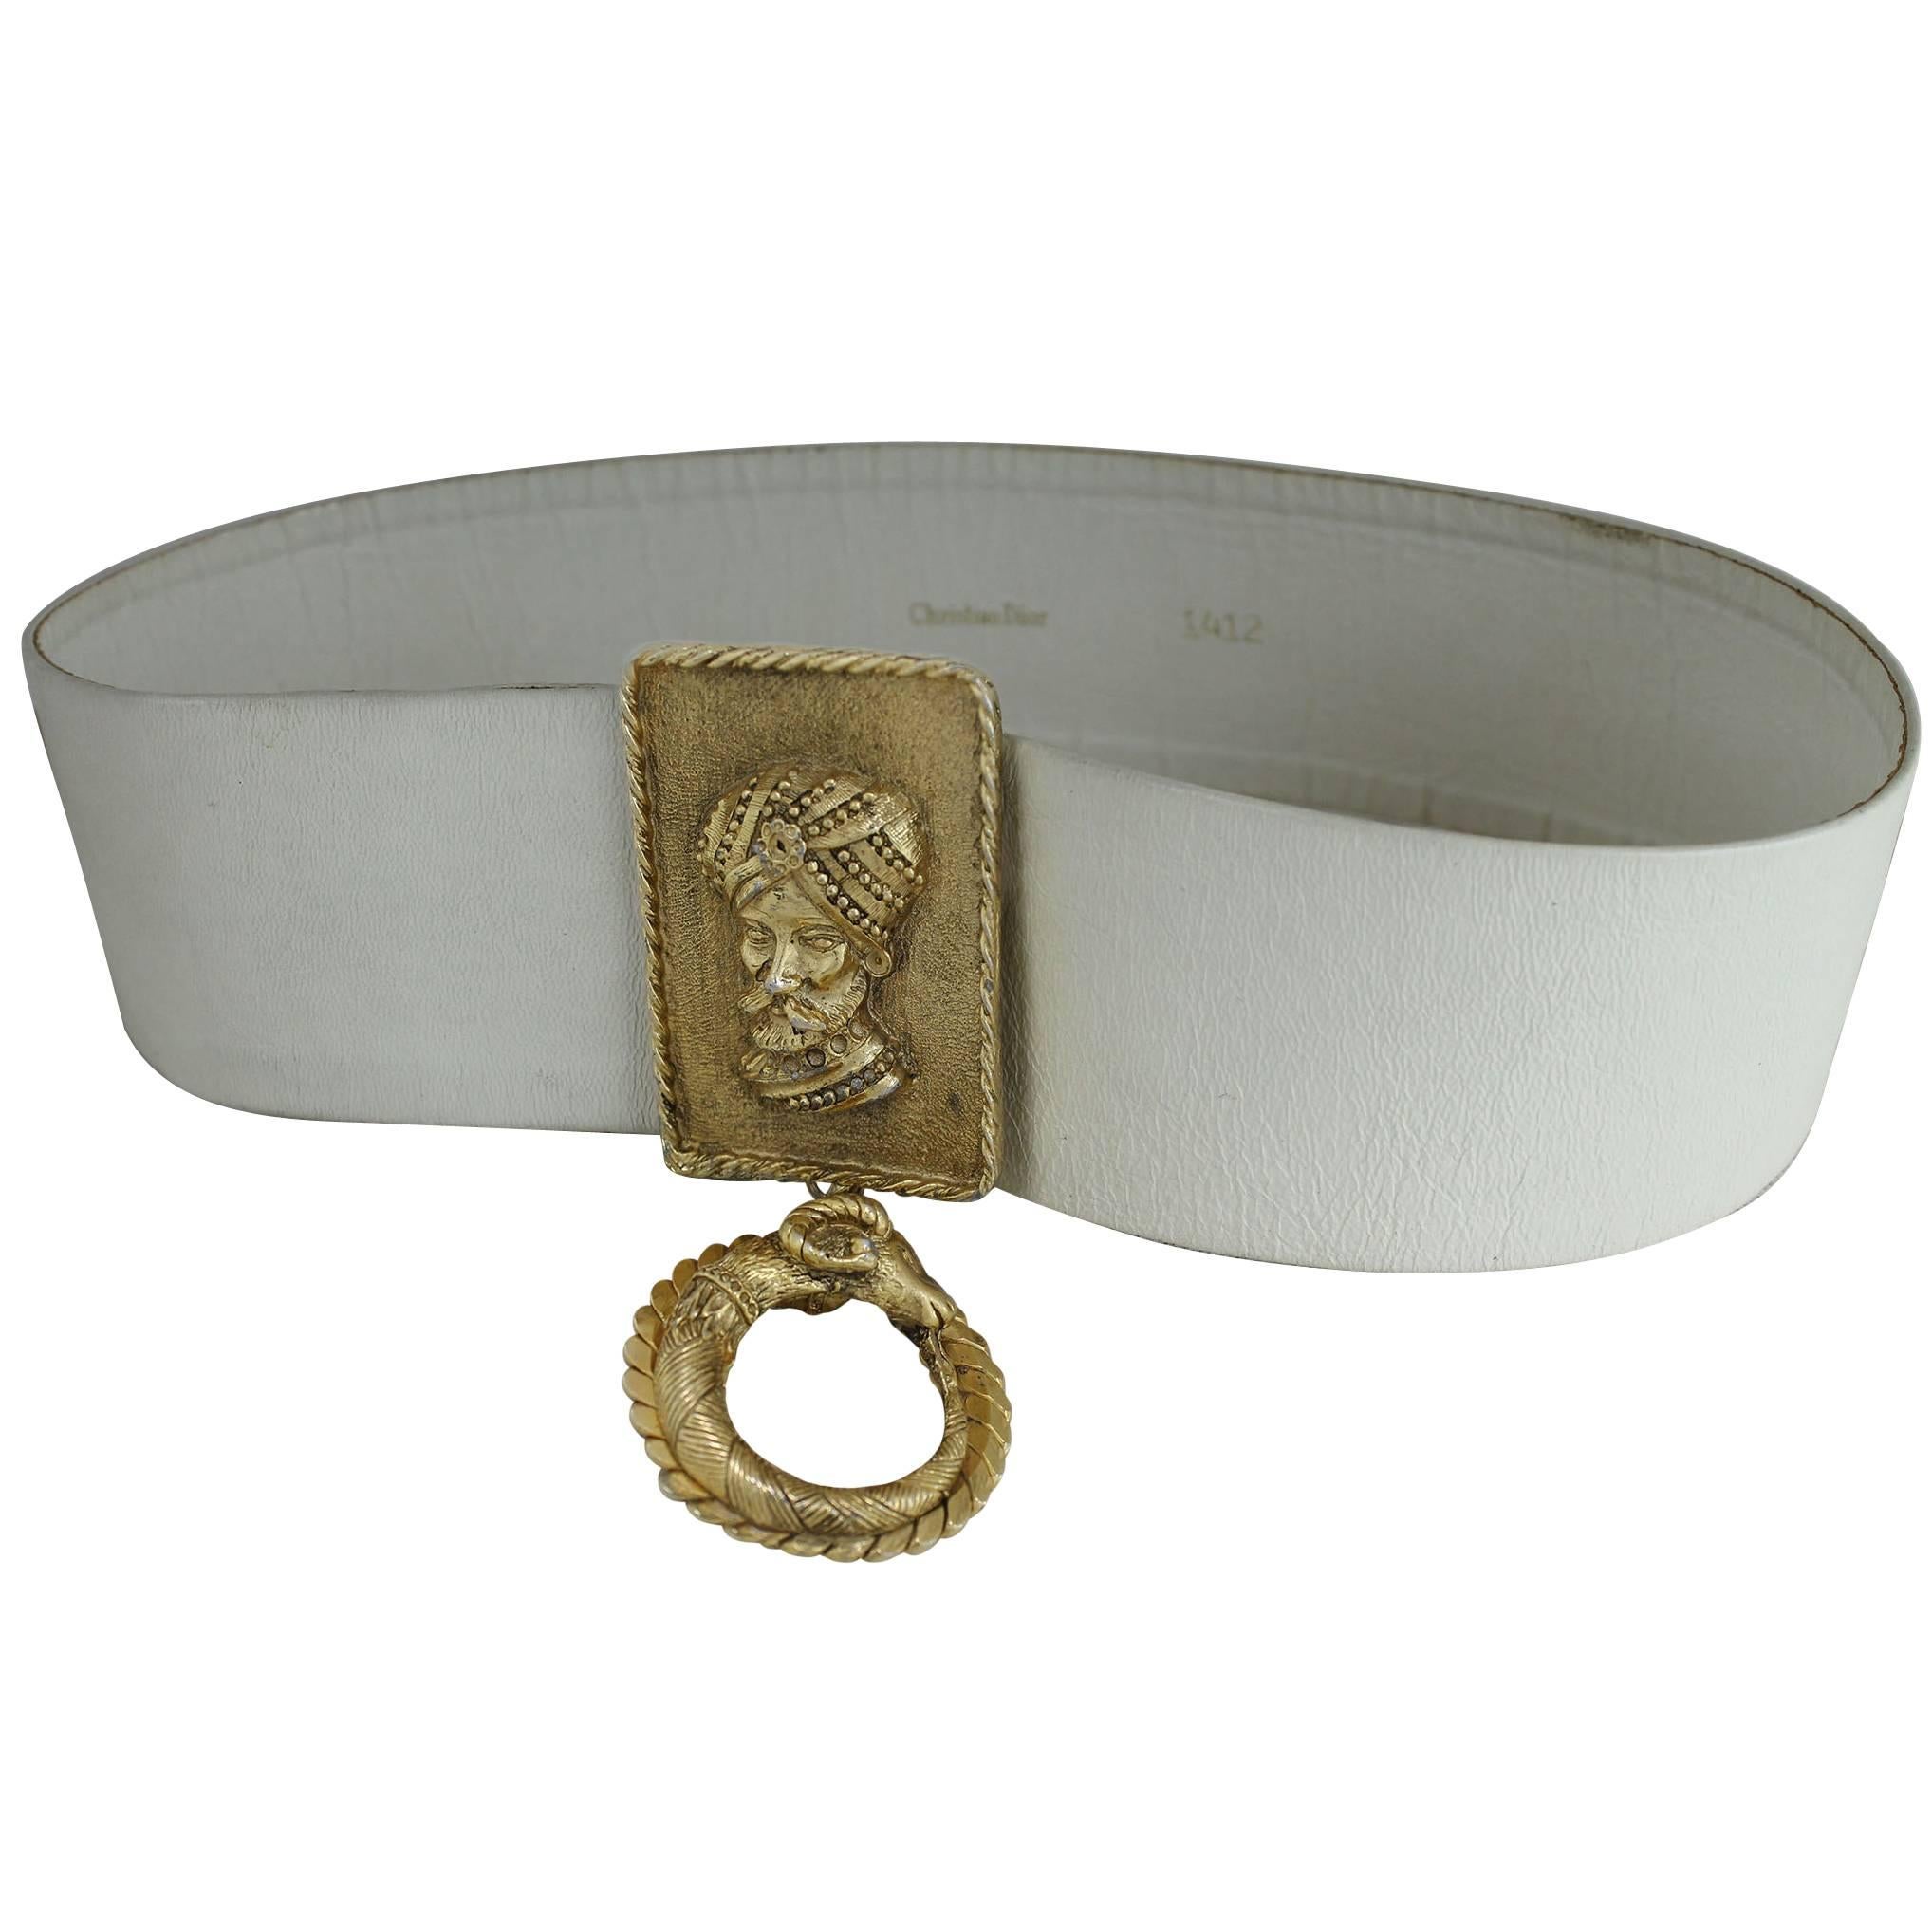 Christian Dior Leather Belt with Gold-Tone Sultan in Turban and Rams Head Buckle For Sale